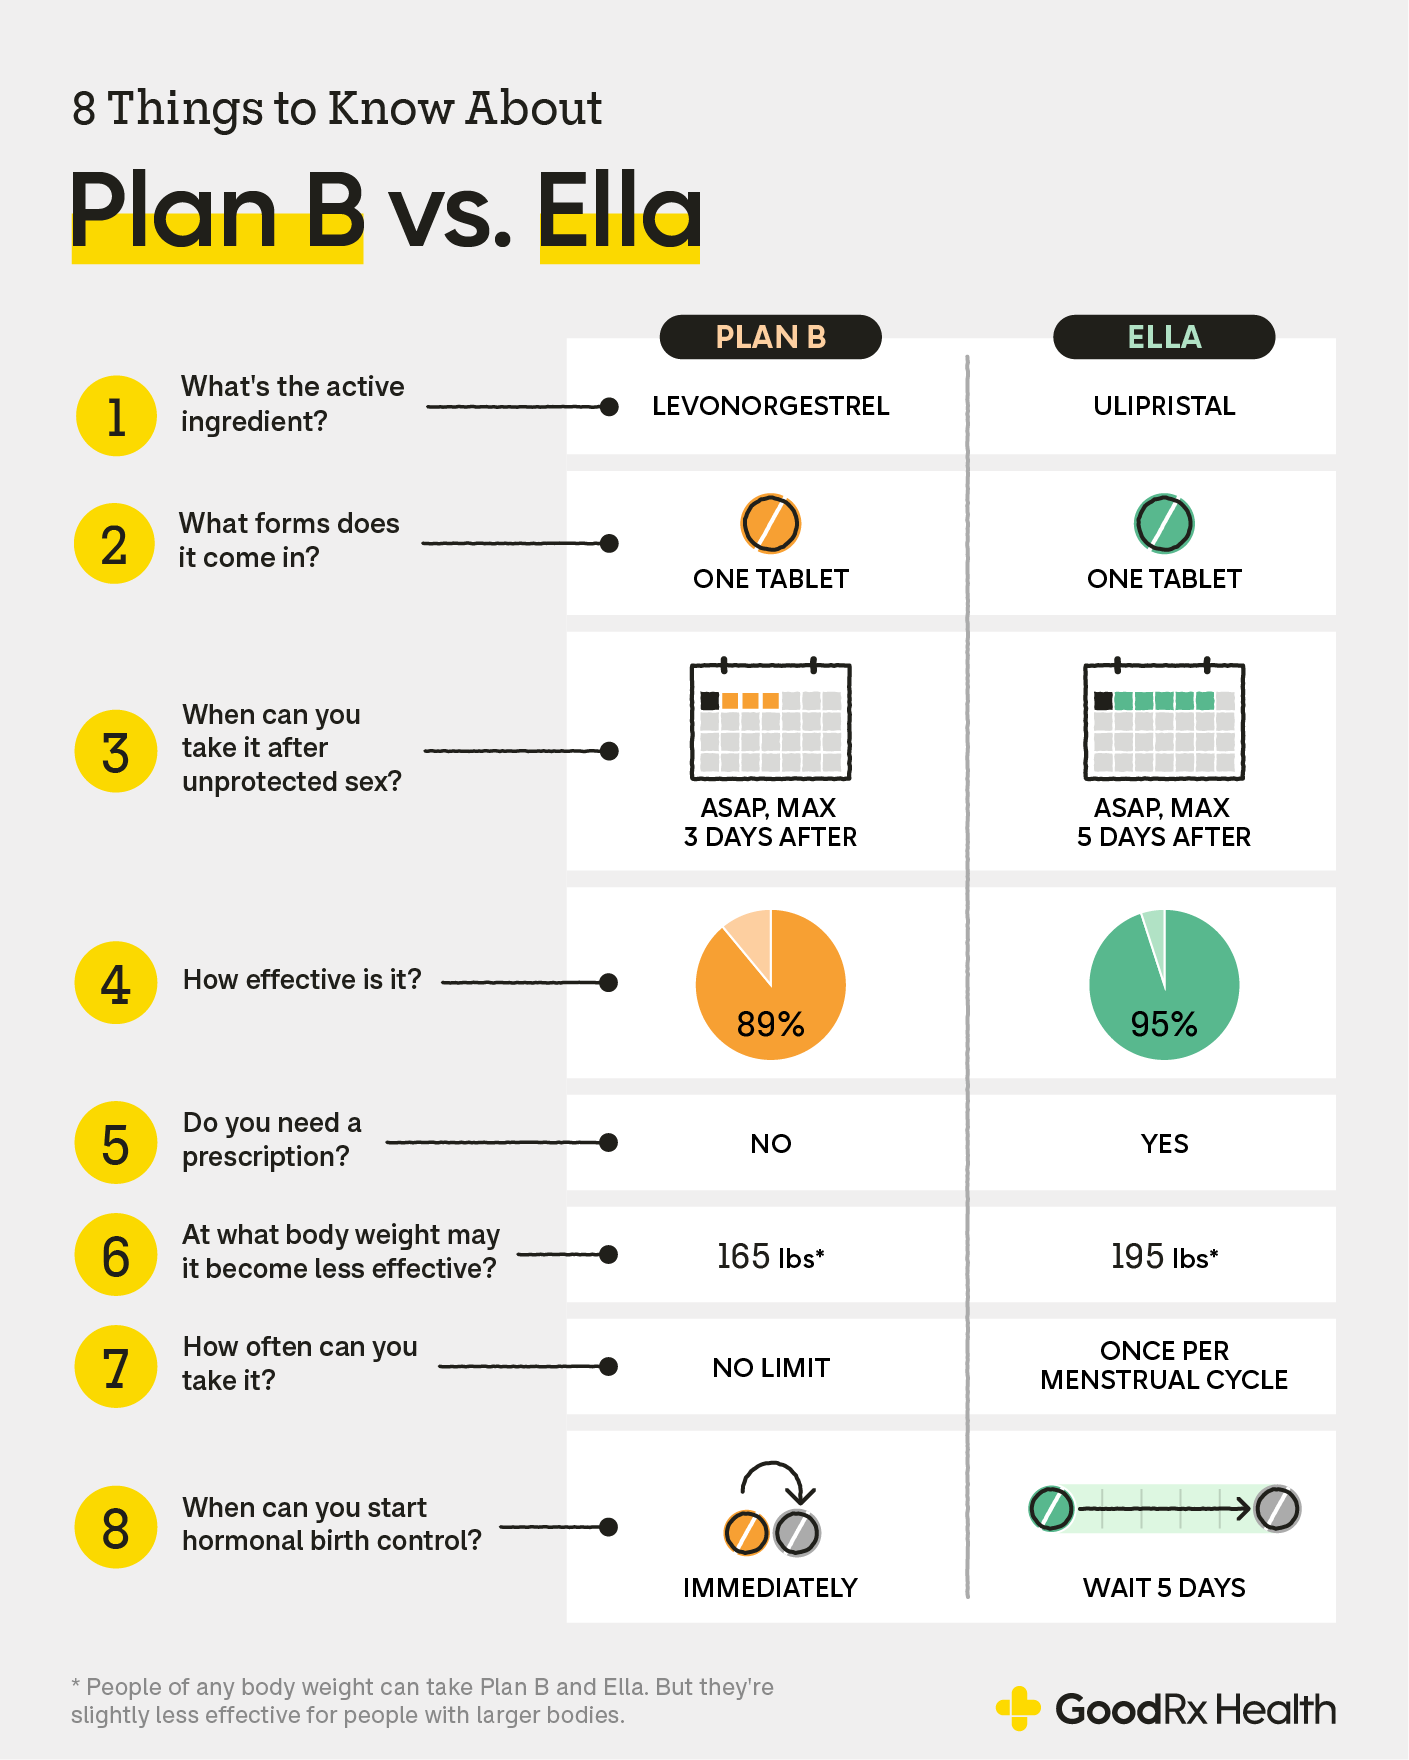 Plan B: Cost and where to buy